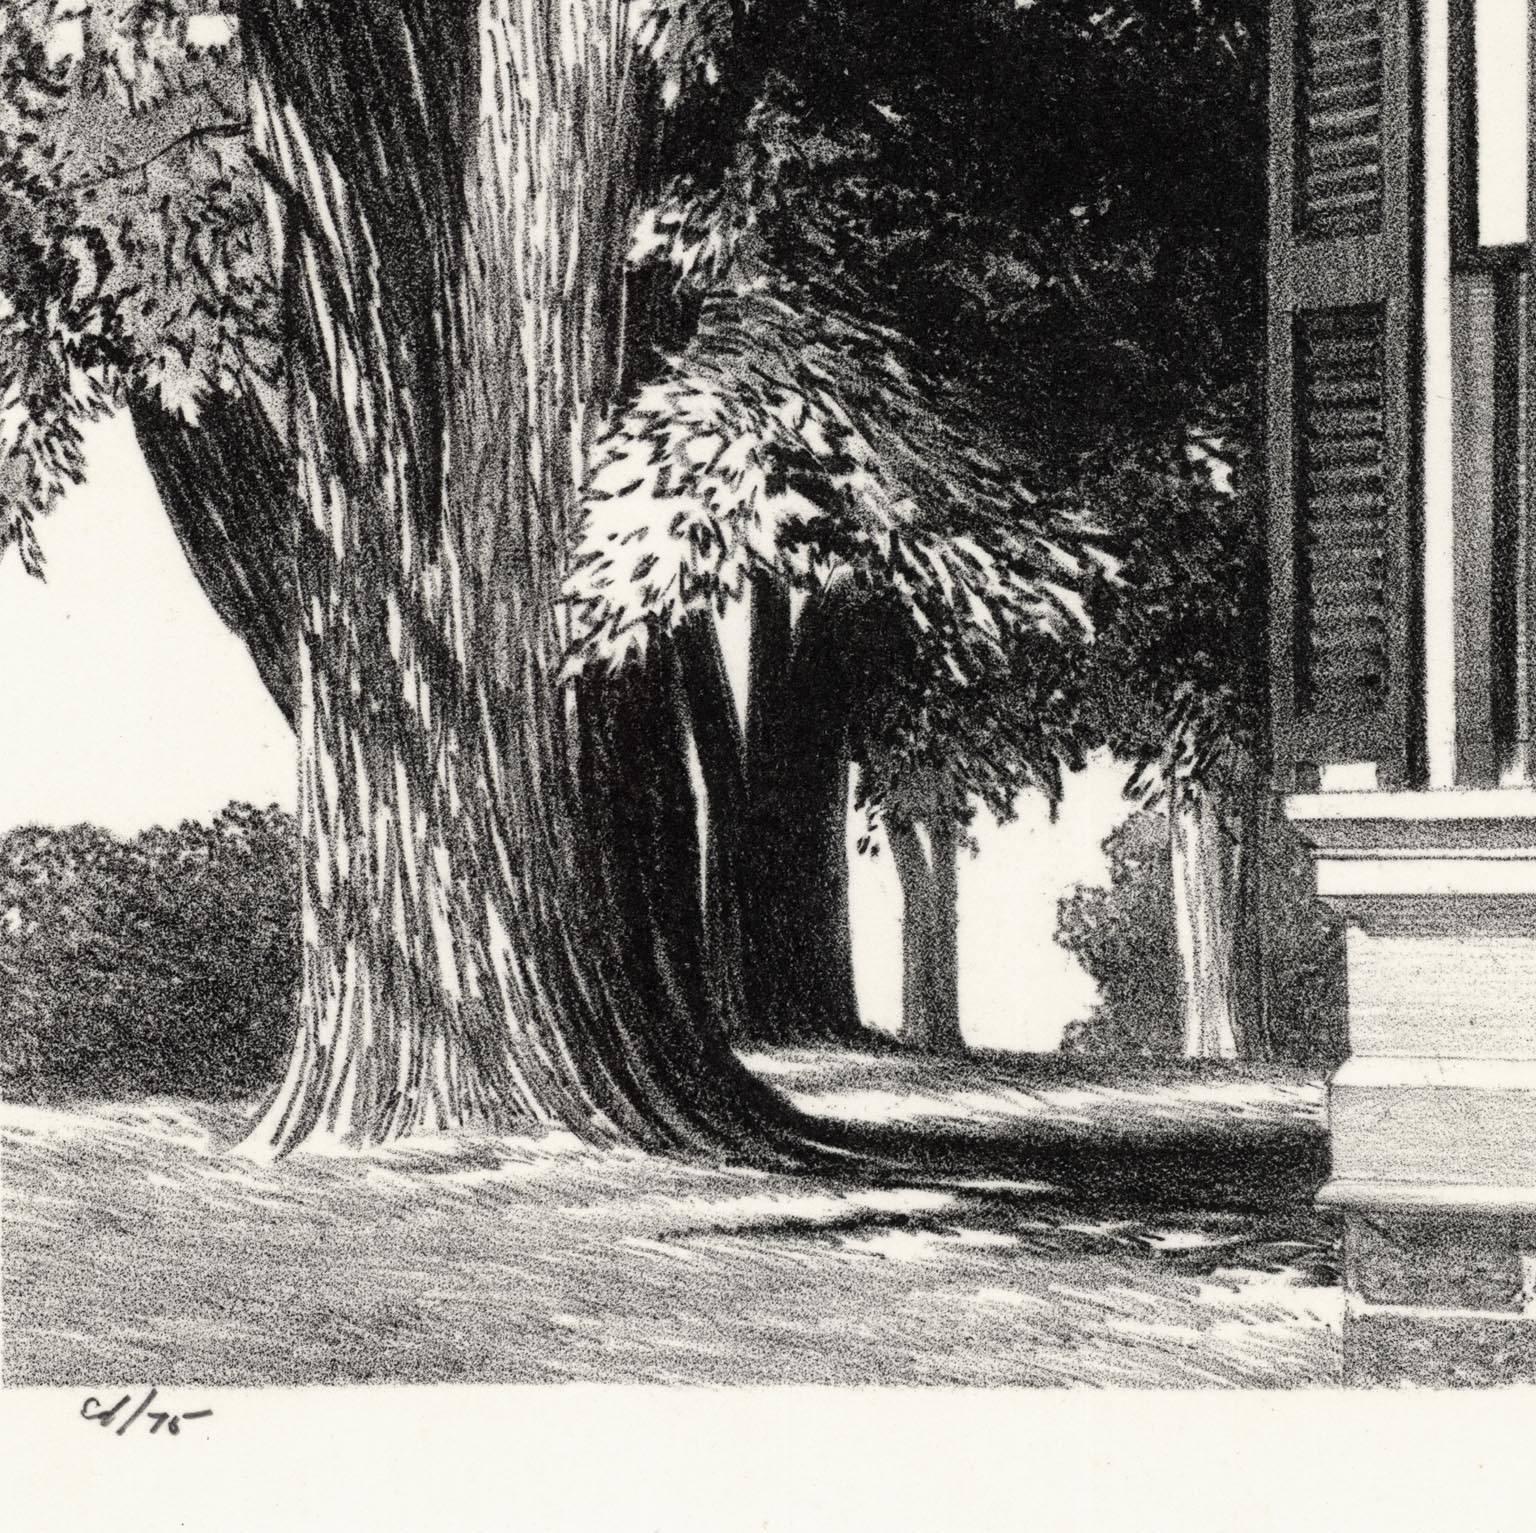 This Wengenroth lithograph was printed in 1974 in an edition of 75 impressions.  Signed in pencil in the lower right and inscribed "Ed/75" in the lower left.  The paper size is 13 1/4 x 17 1/4" and the image size is 9 x 13 1/8"